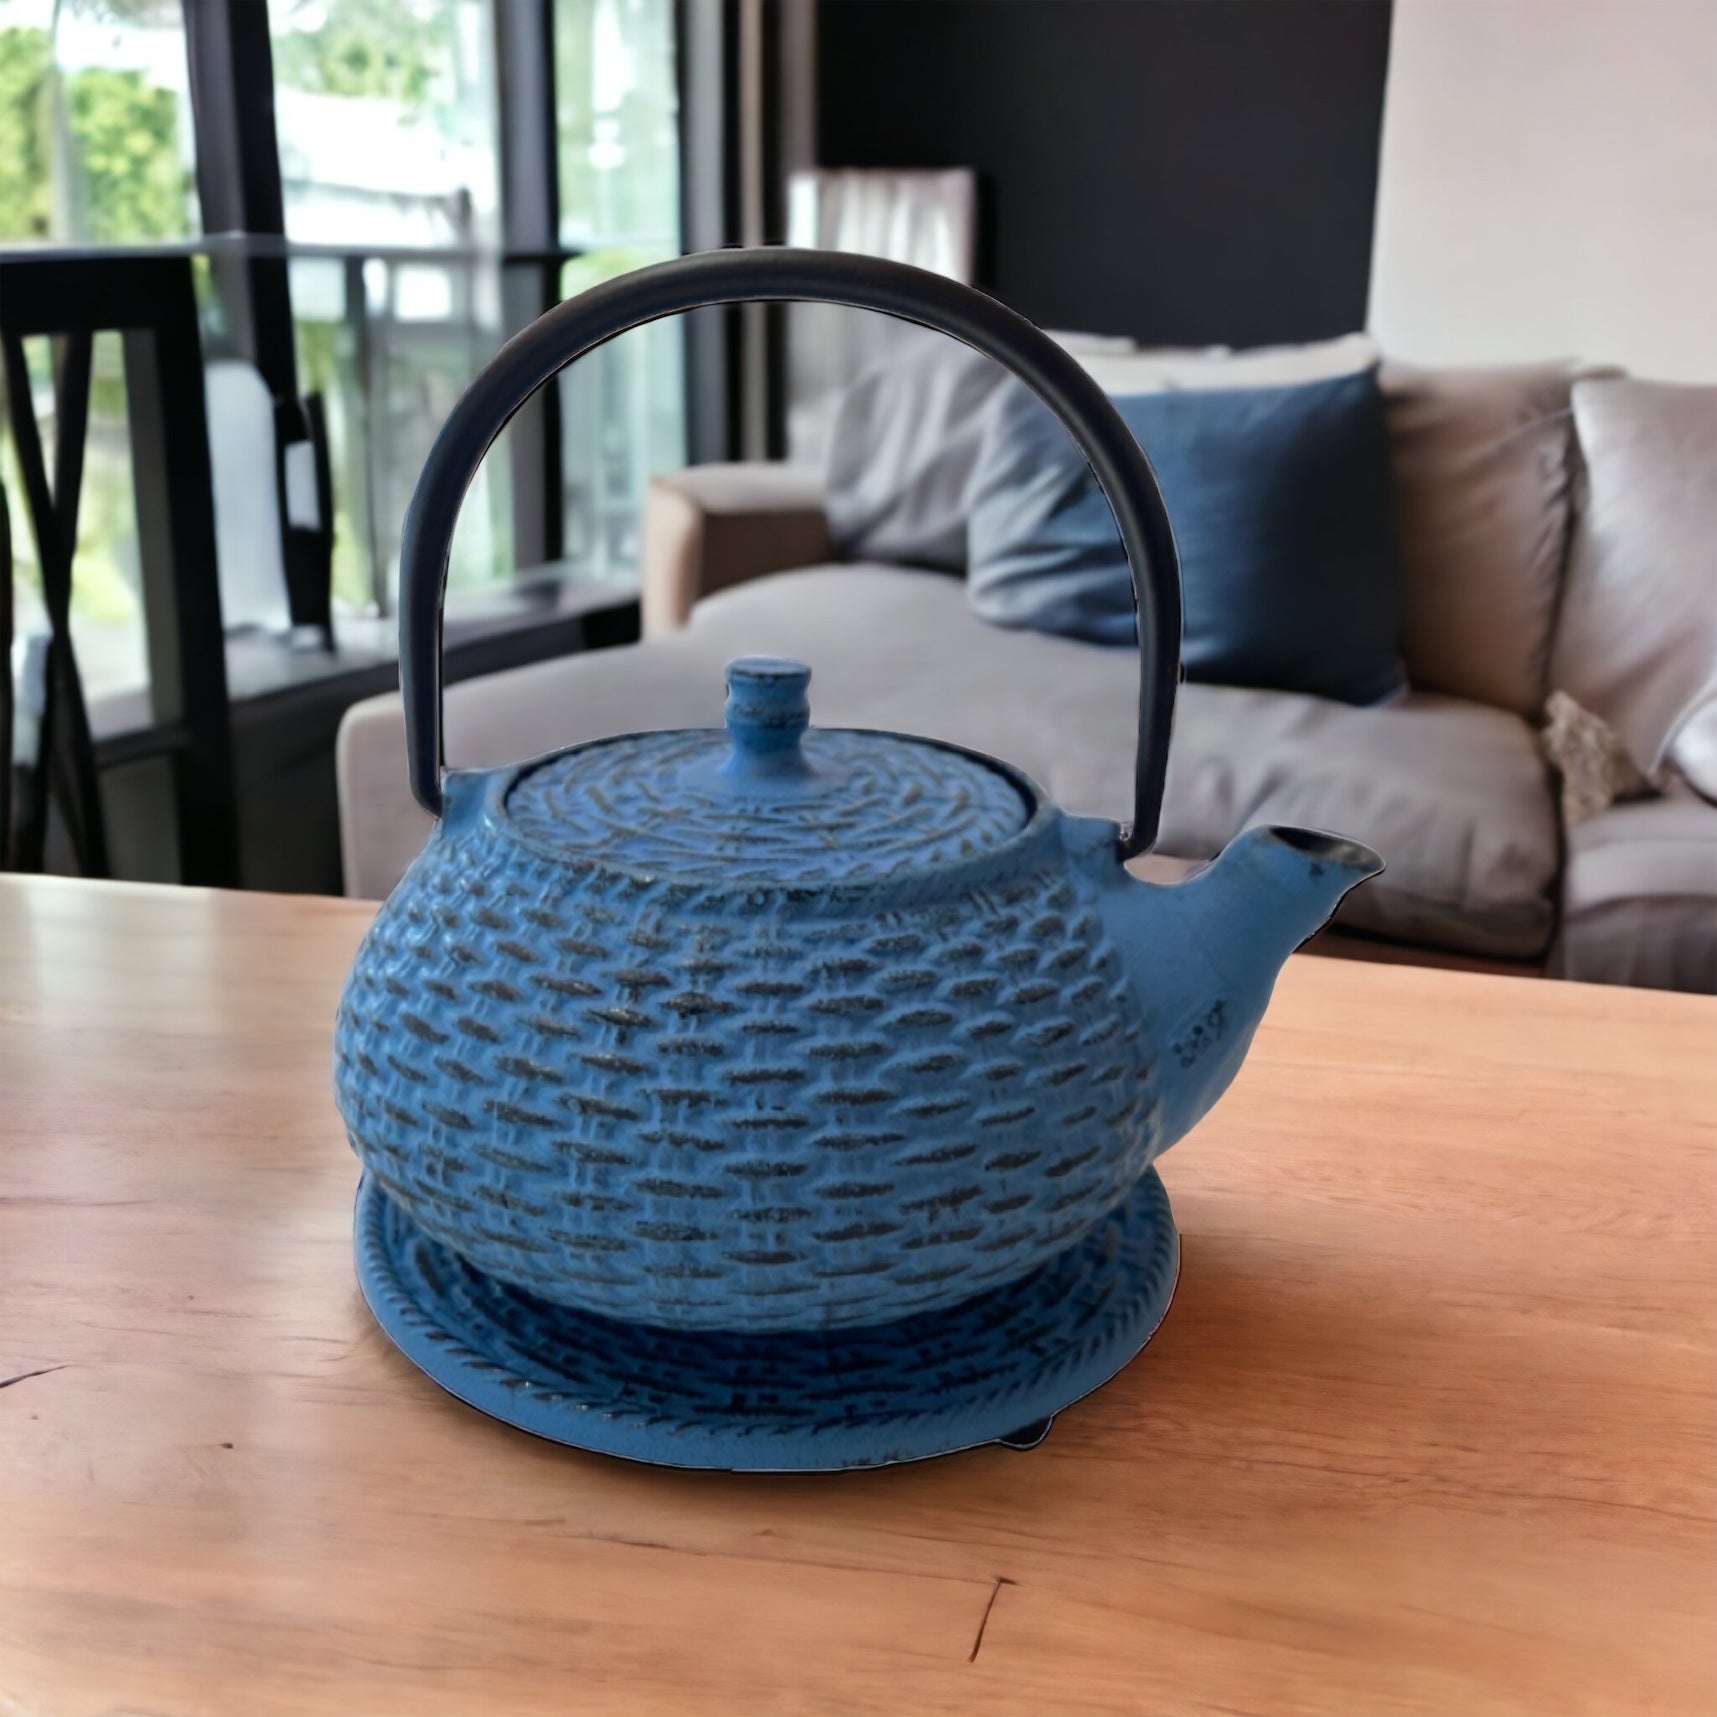 Teapot Cast Iron Blue Vintage - The Renmy Store Homewares & Gifts 